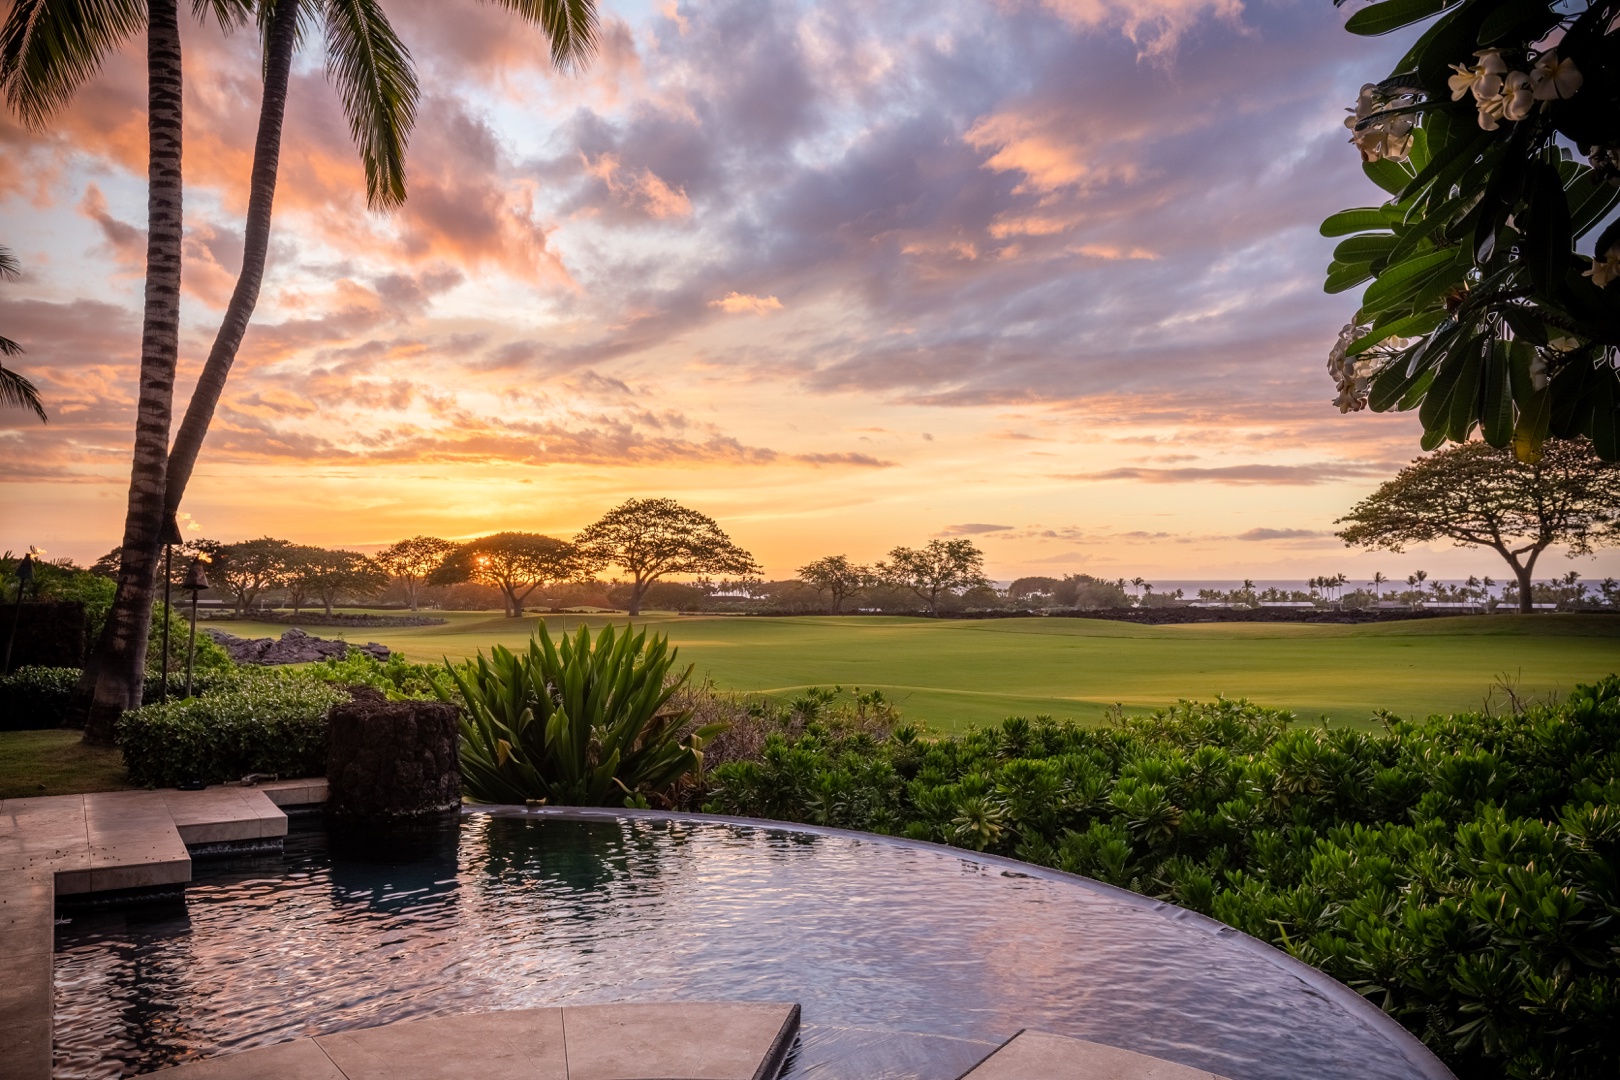 Kailua Kona Vacation Rentals, 4BD Pakui Street (147) Estate Home at Four Seasons Resort at Hualalai - The majestic Hawaiian sunset from this exquisite estate's private spa.